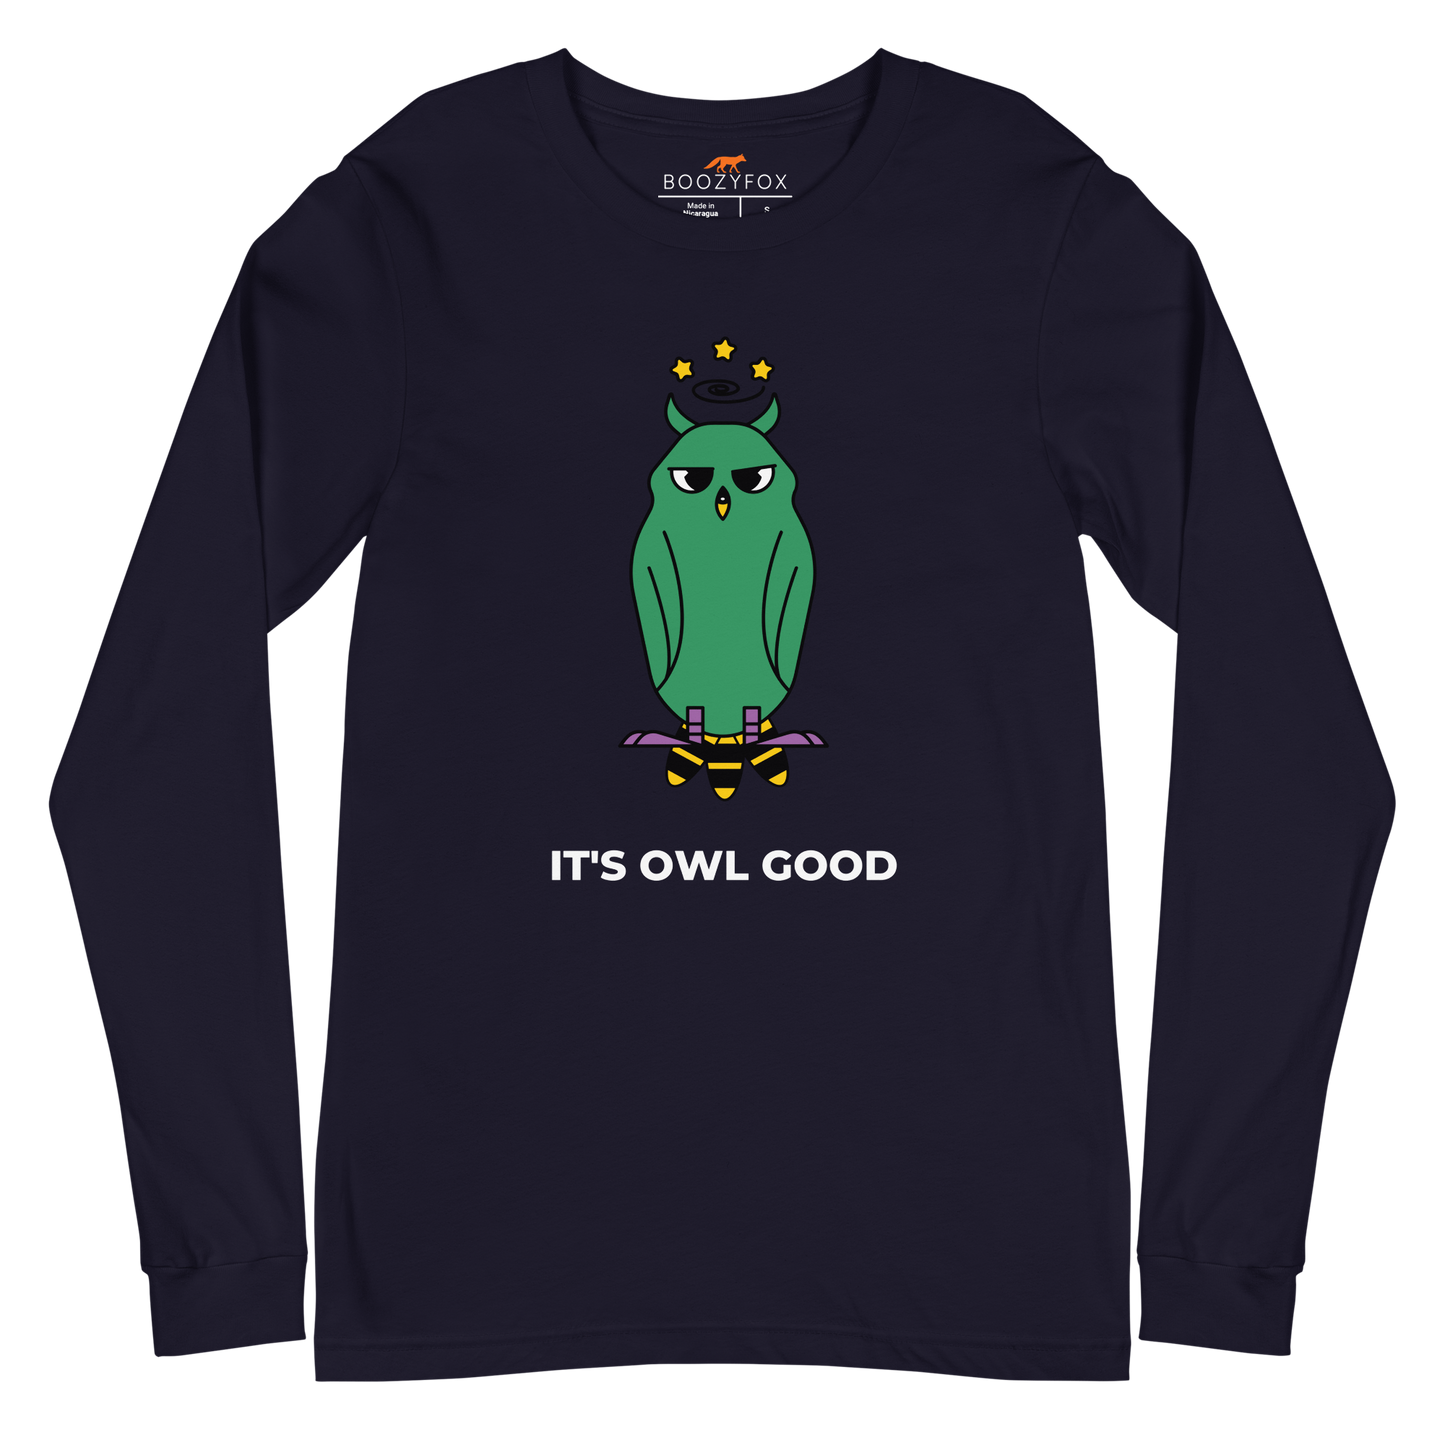 Navy Owl Long Sleeve Tee featuring a captivating It's Owl Good graphic on the chest - Funny Owl Long Sleeve Graphic Tees - Boozy Fox